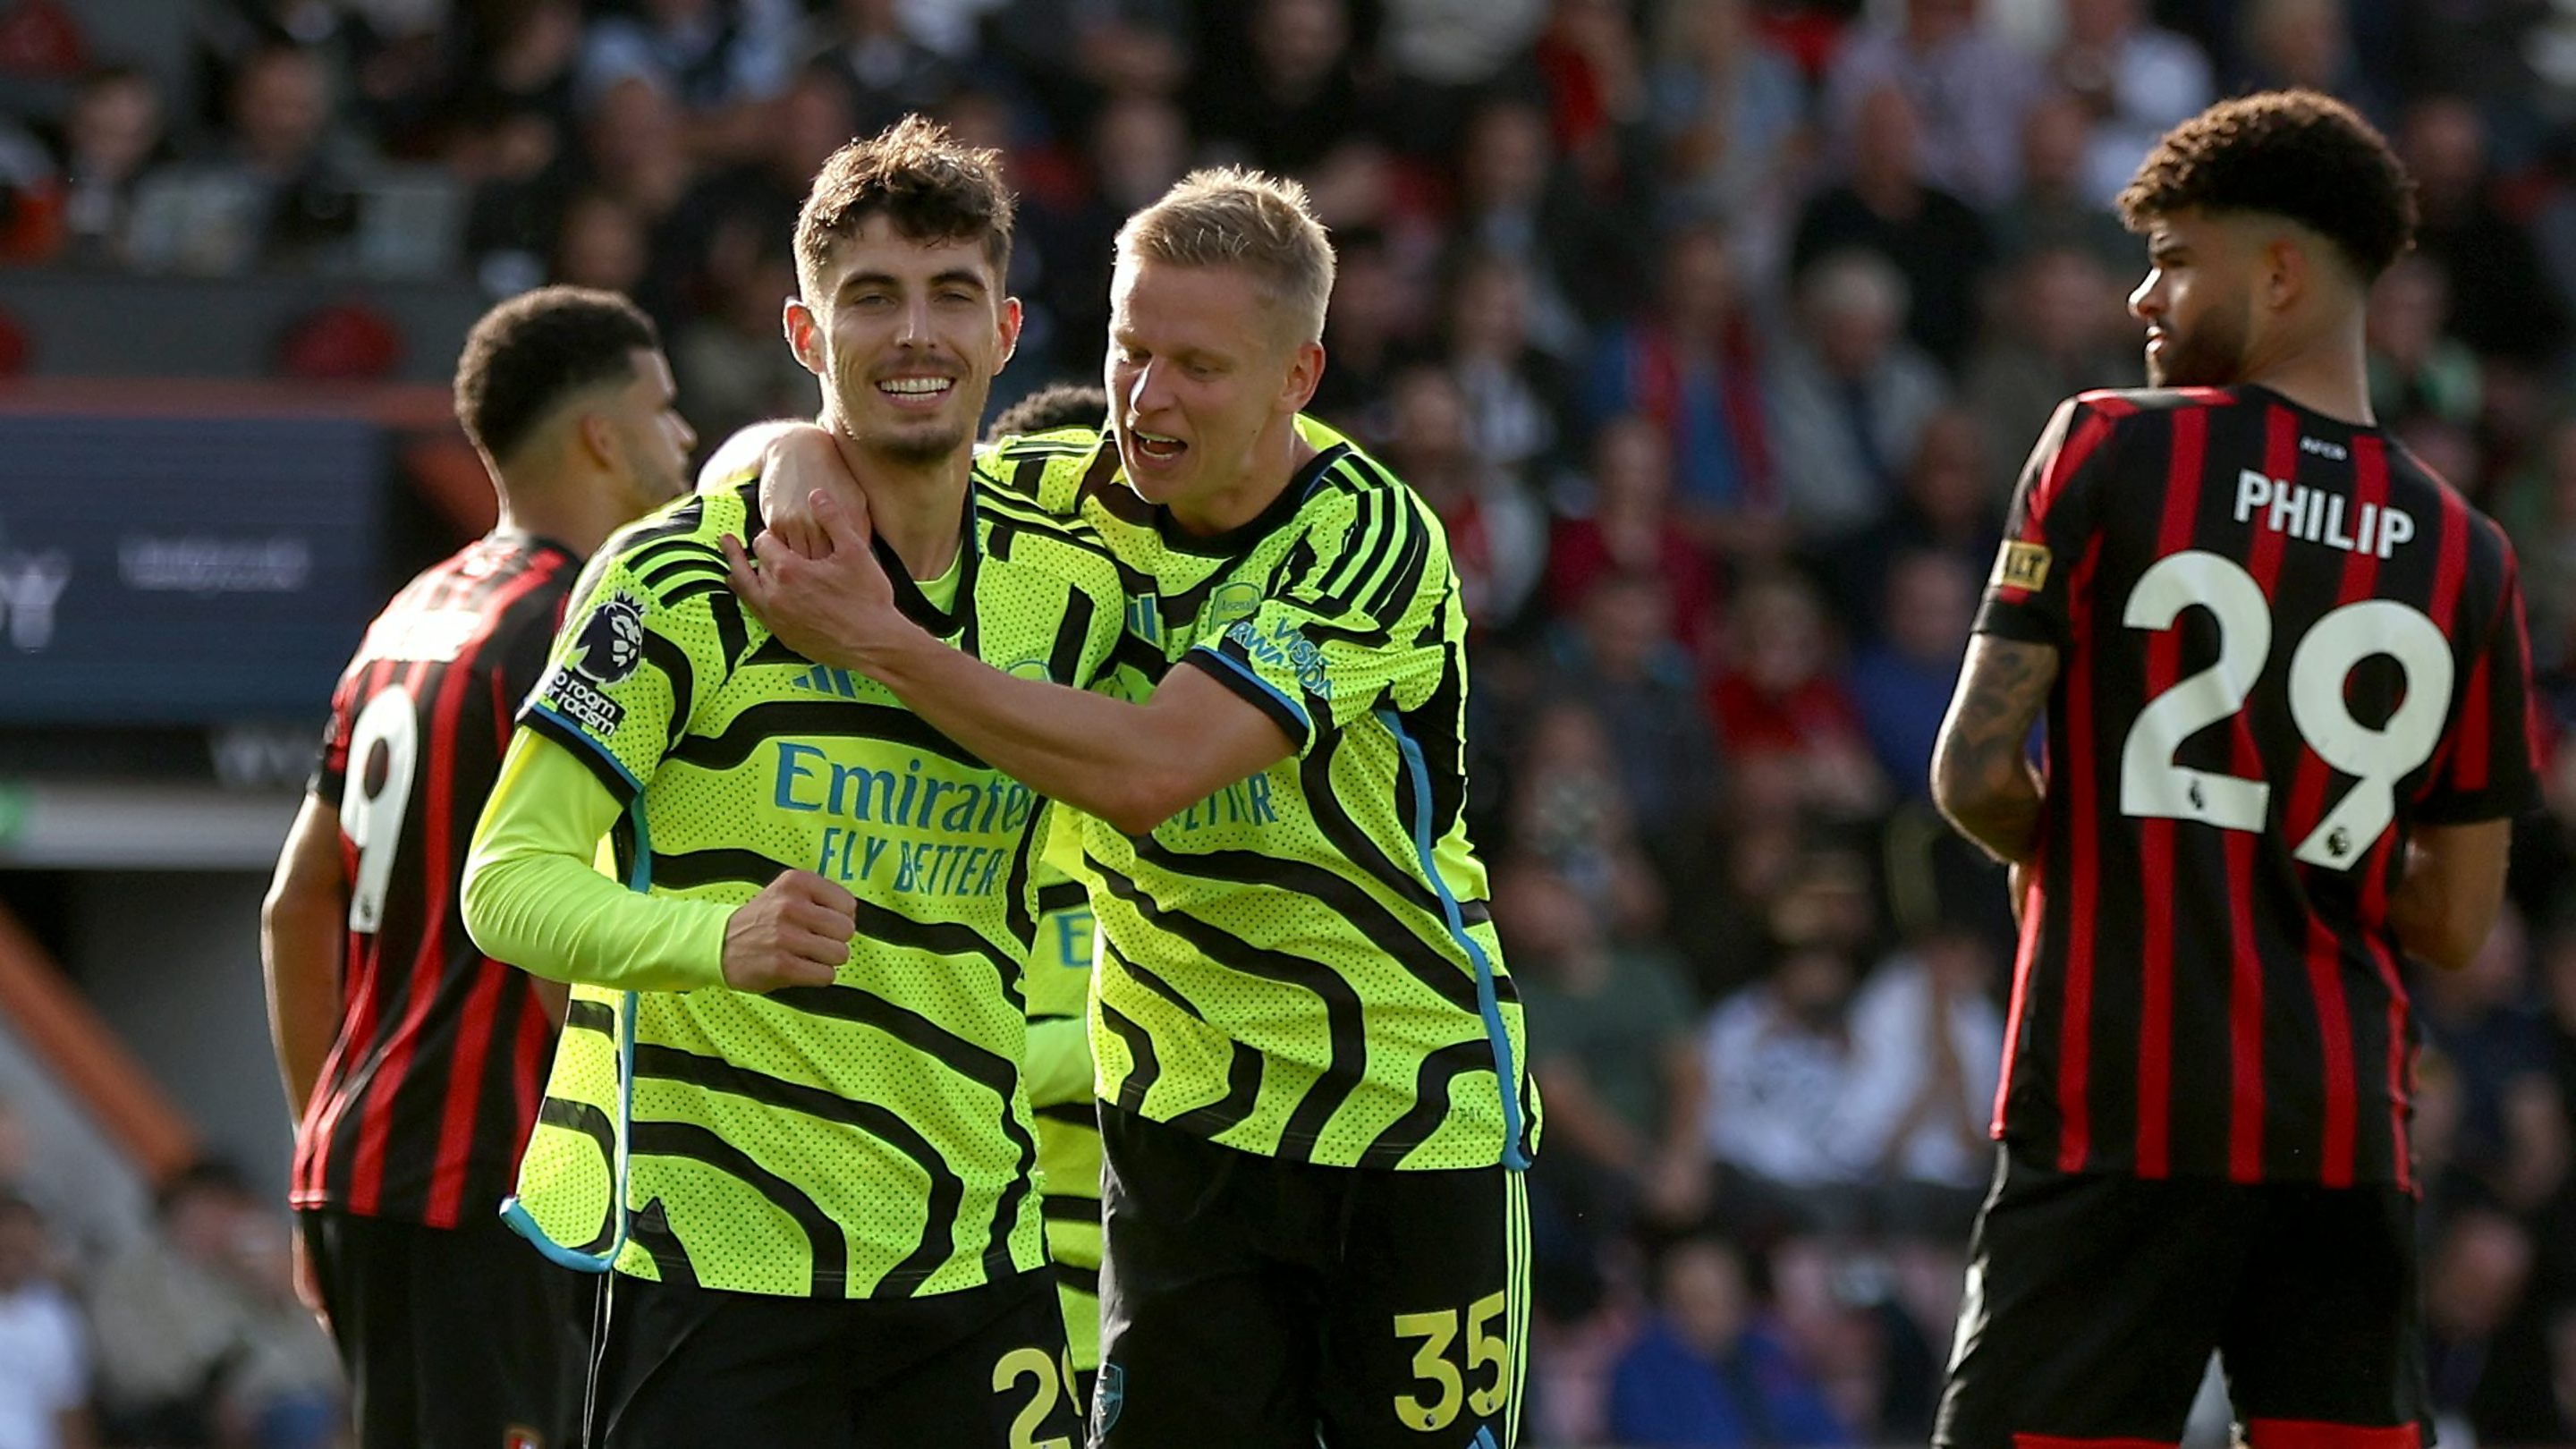 Bournemouth 0-4 Arsenal: Player ratings as Kai Havertz nets first goal in comfortable victory